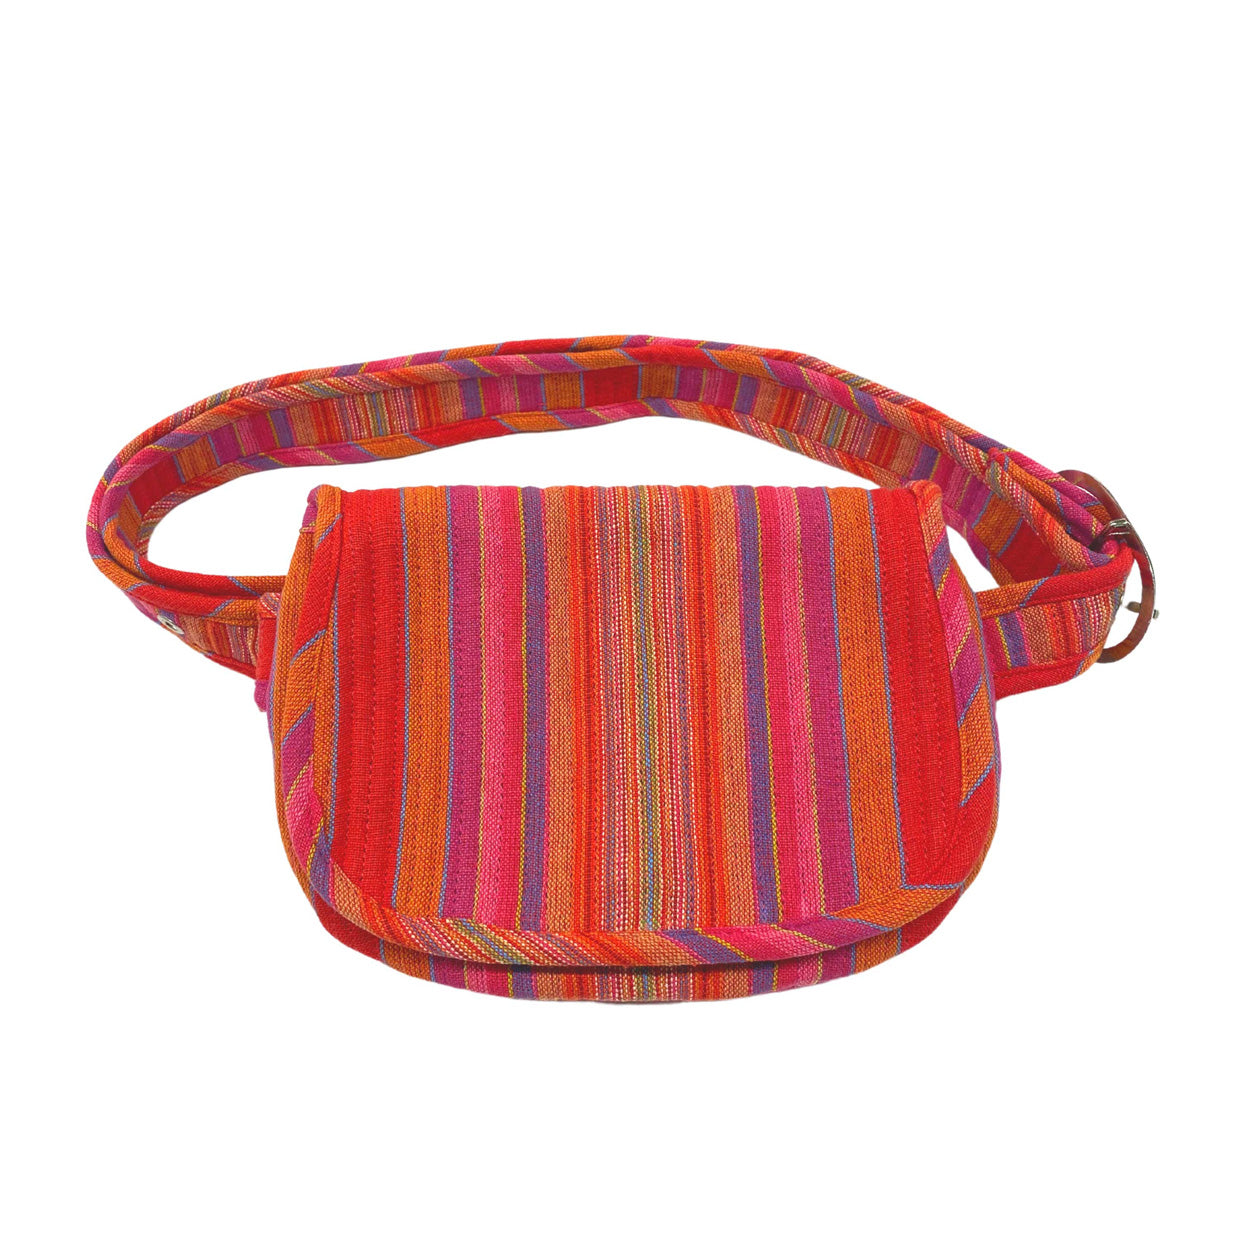 NEW Quilted Koala Belt Bag - Pink Happy Stripe - Quilted Koala